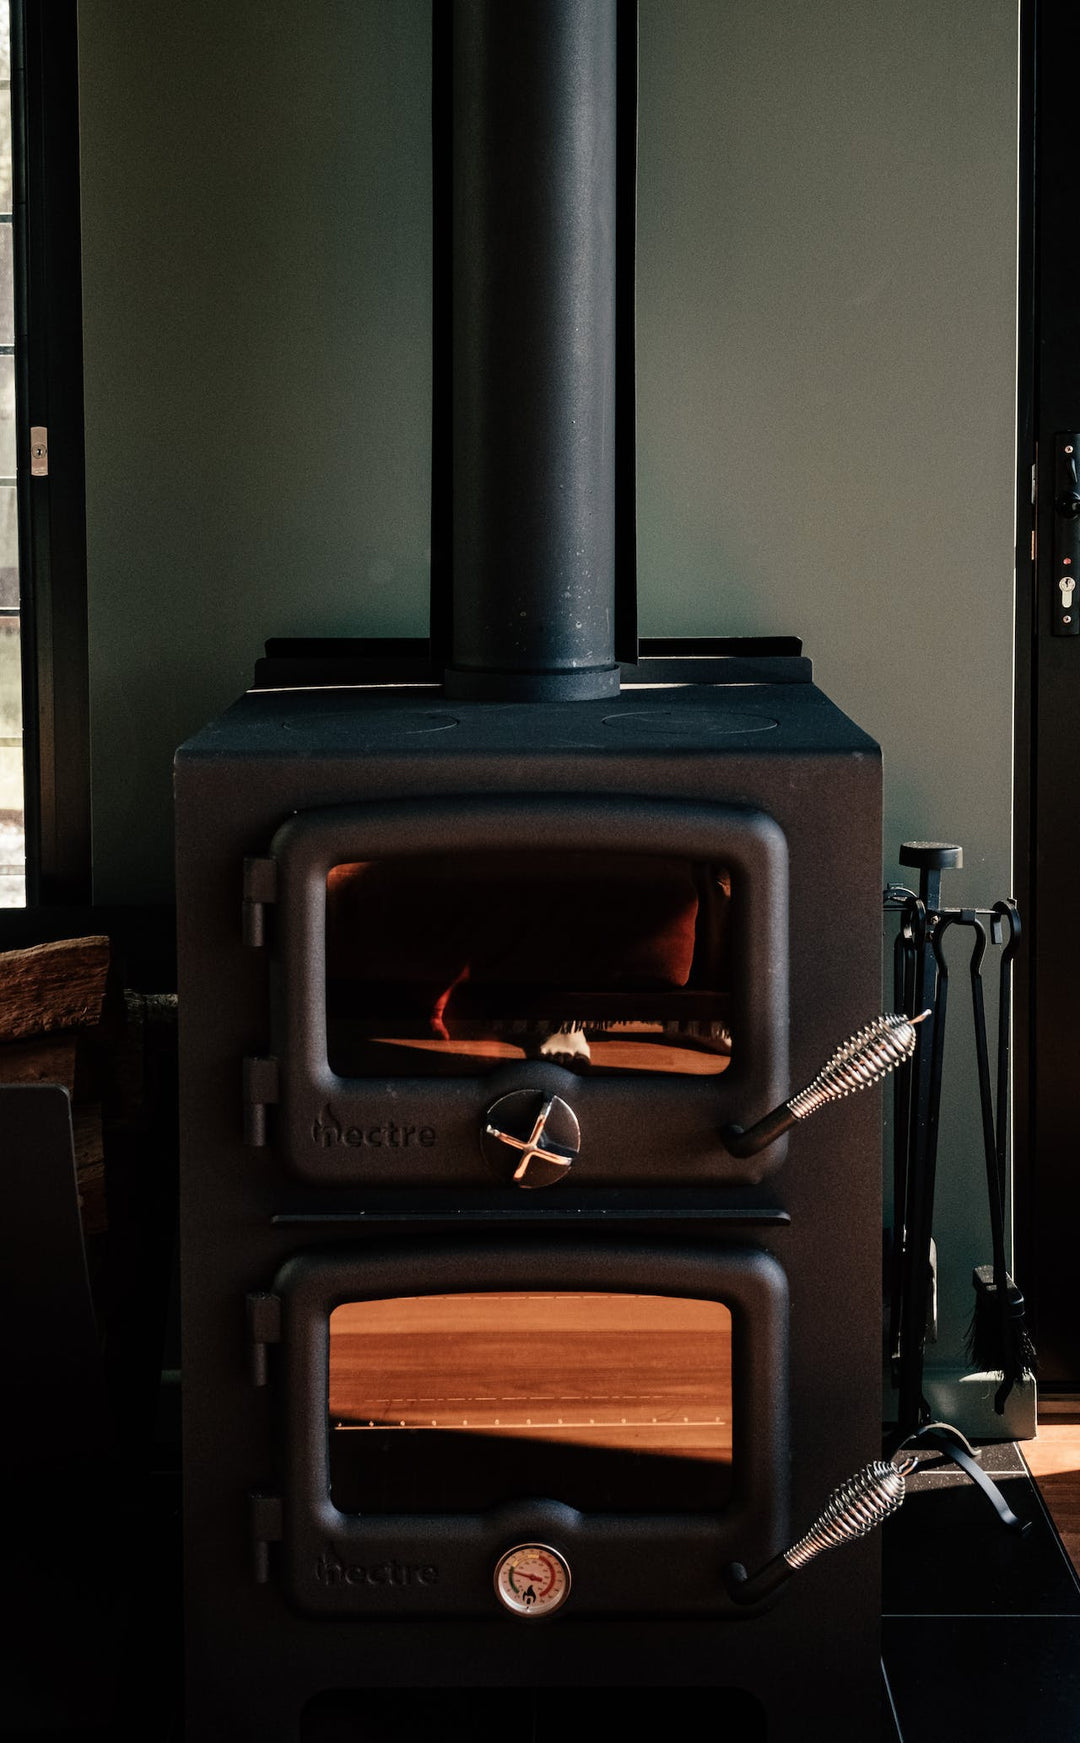 How To Use a Wood-Burning Stove